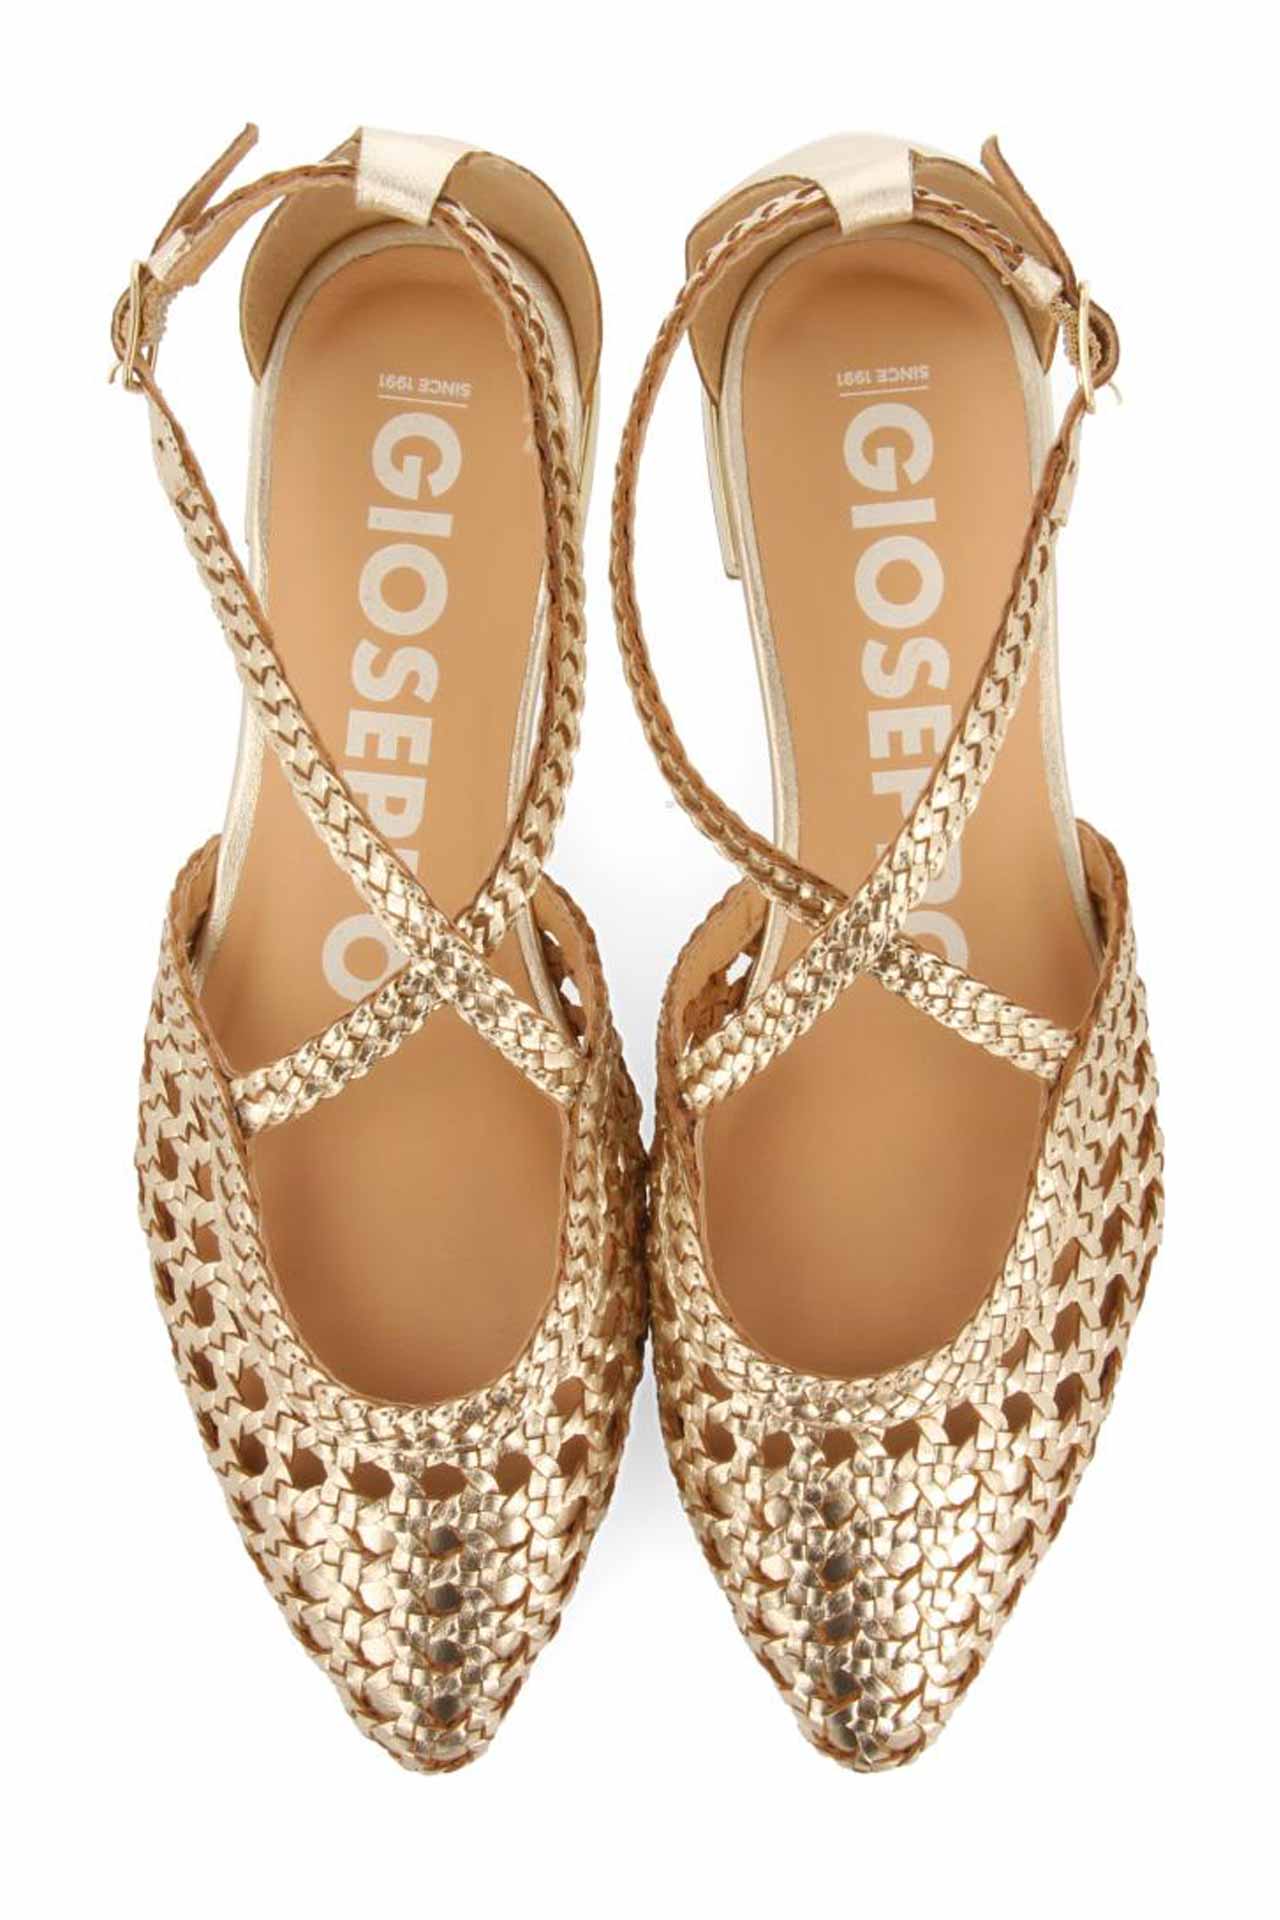 GIOSEPPO LESKOVIC GOLD LEATHER BALLERINAS WITH BRAIDED DETAIL